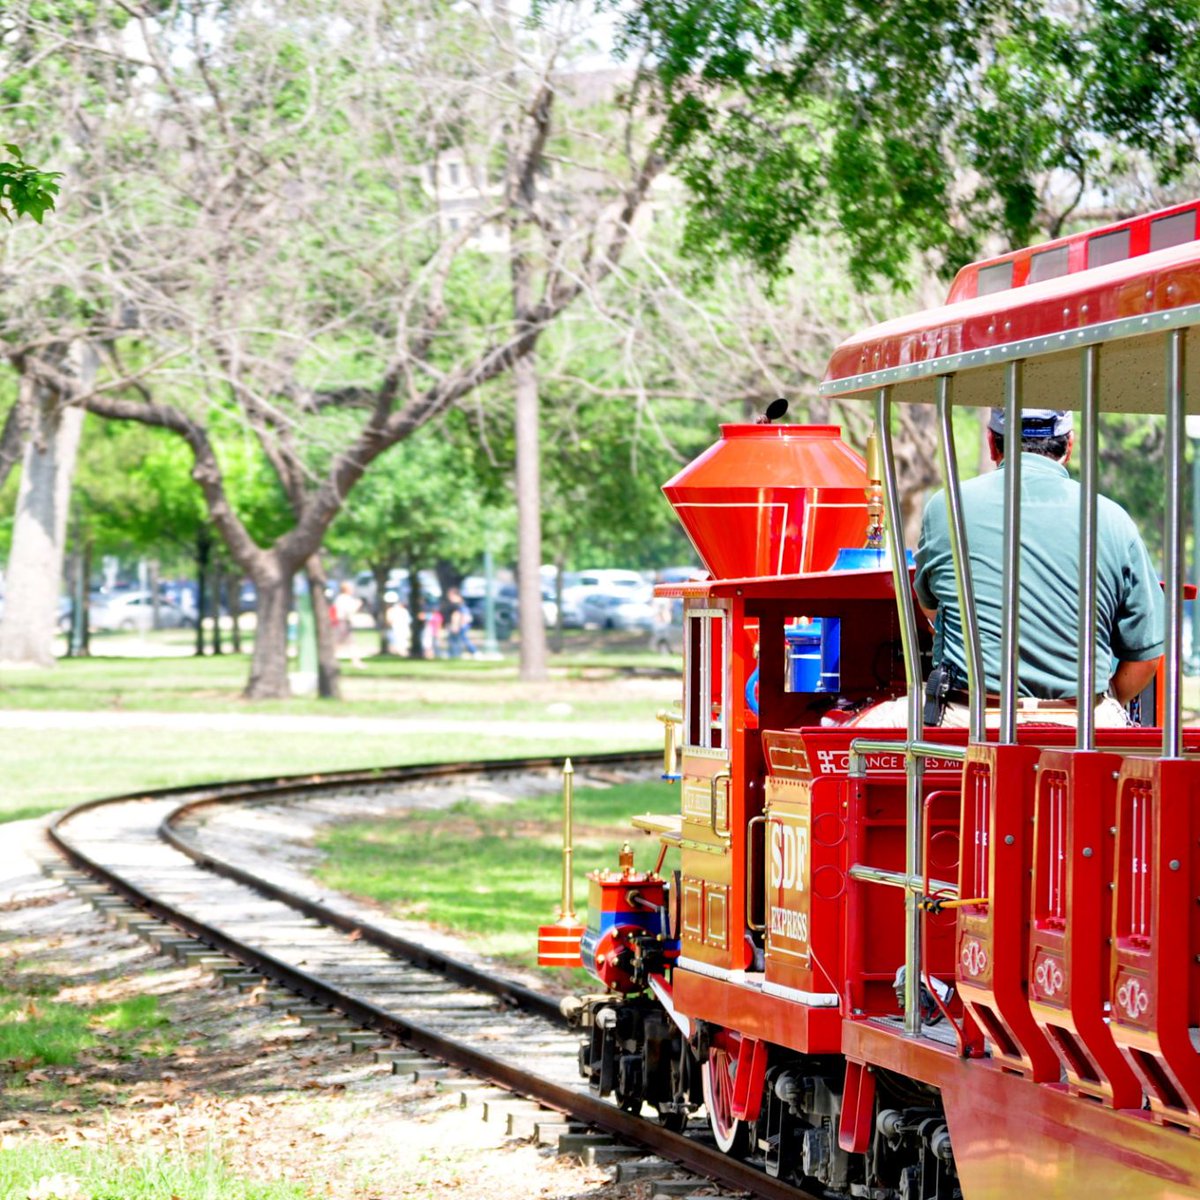 Explore @HermannPark to get sights & sounds of auto dashing & bike hustling in Houston. Reserve a room here situated in the heart of the area & make the most of your weekend with no hustle. bit.ly/2Uyp1YY #Staycation #IChangeTheWorld #hermannpark 📸 by: HermannPark